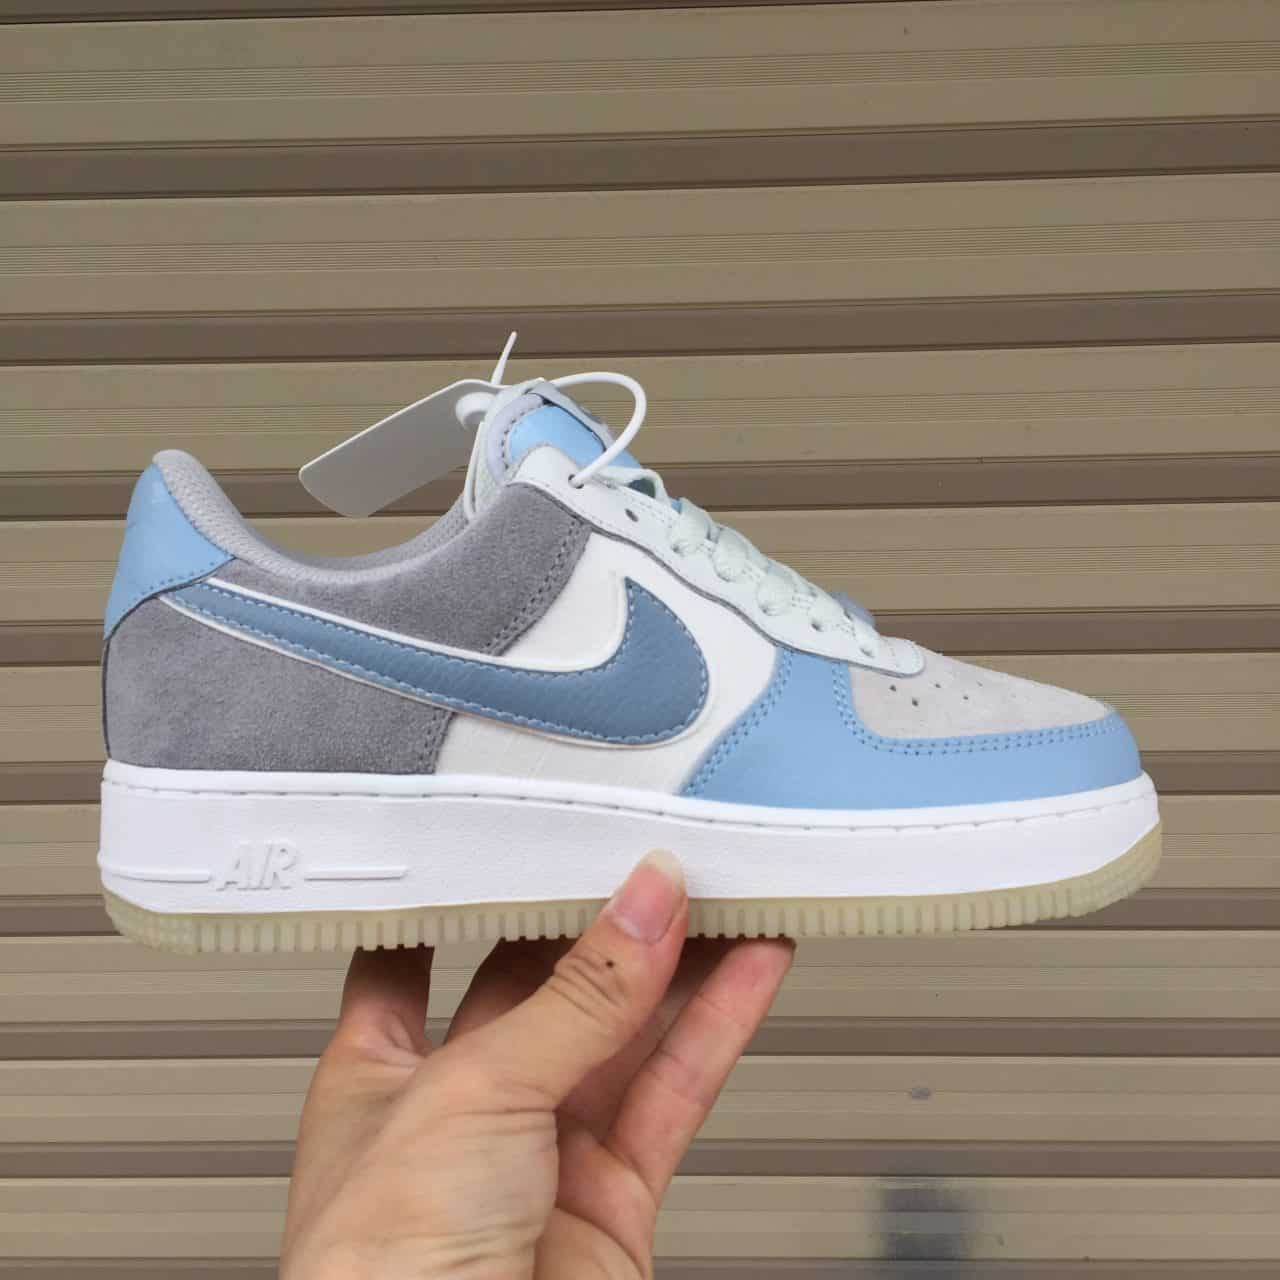 nike air force 1 low light armory blue obsidian mist stores